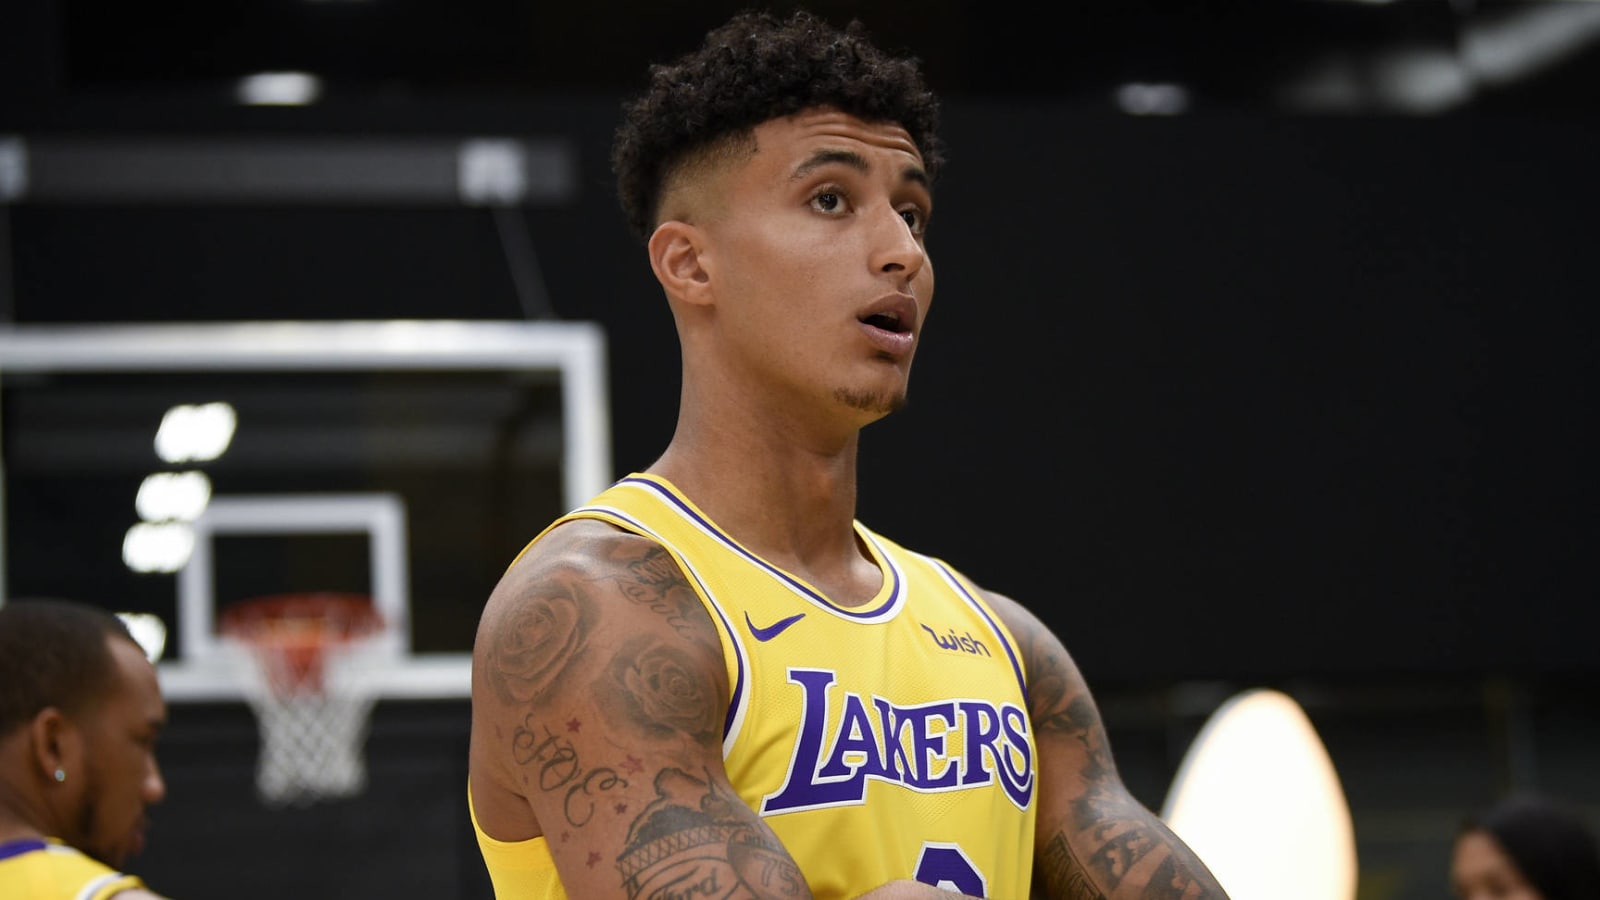 Kyle Kuzma, others had sponsorships pulled while in China